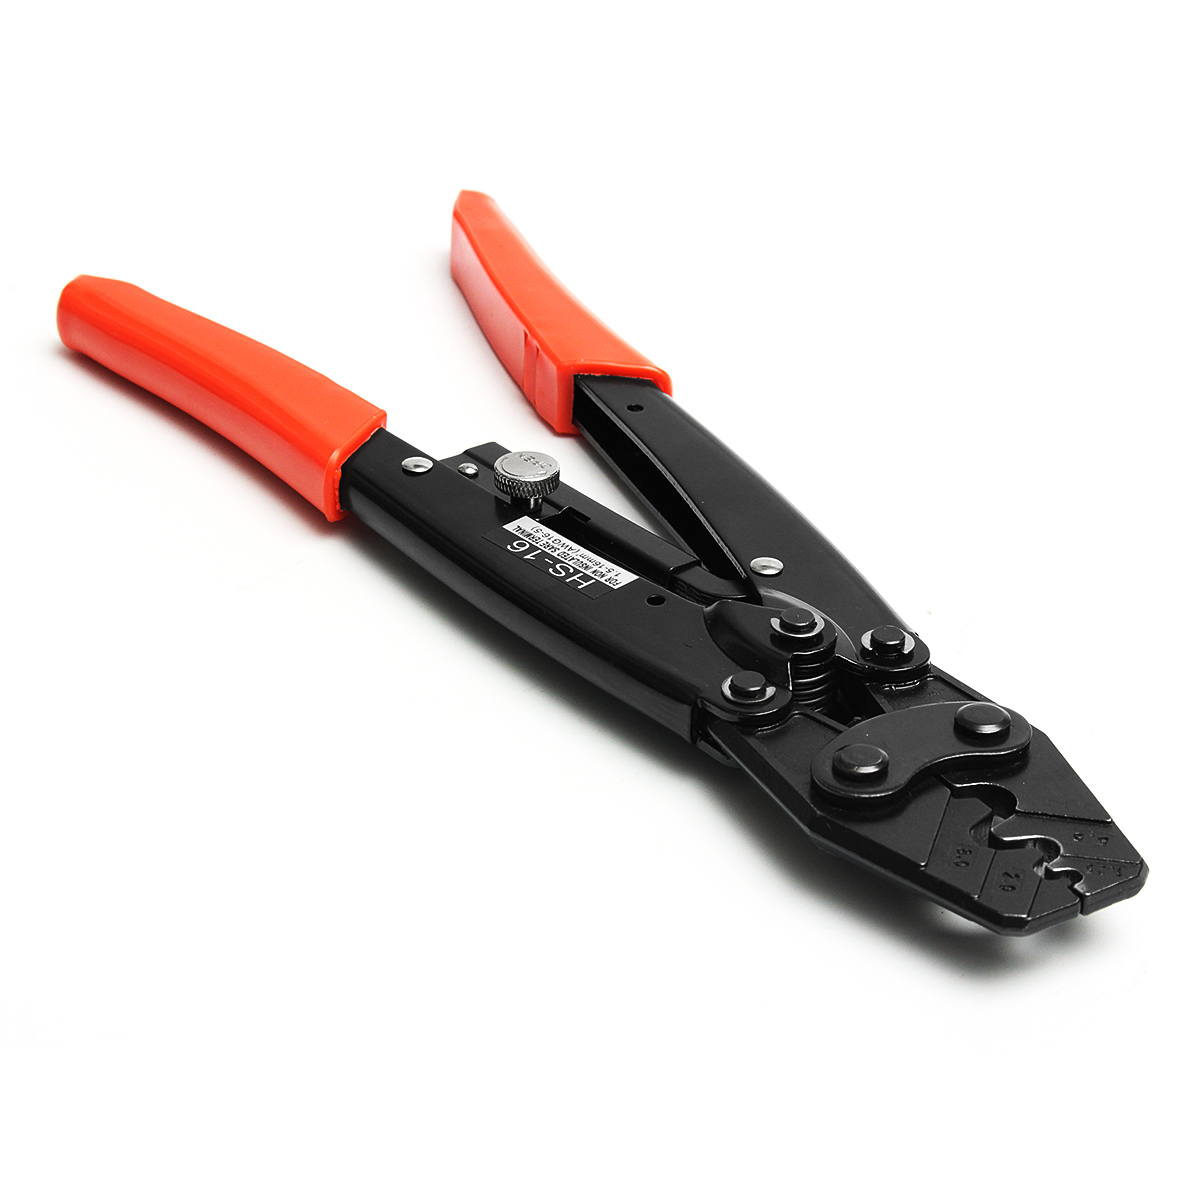 50-Amp-125-16-mm2-Plug-Cable-Crimping-Tool-For-Wire-Crimper-Terminals-Links-1131124-5